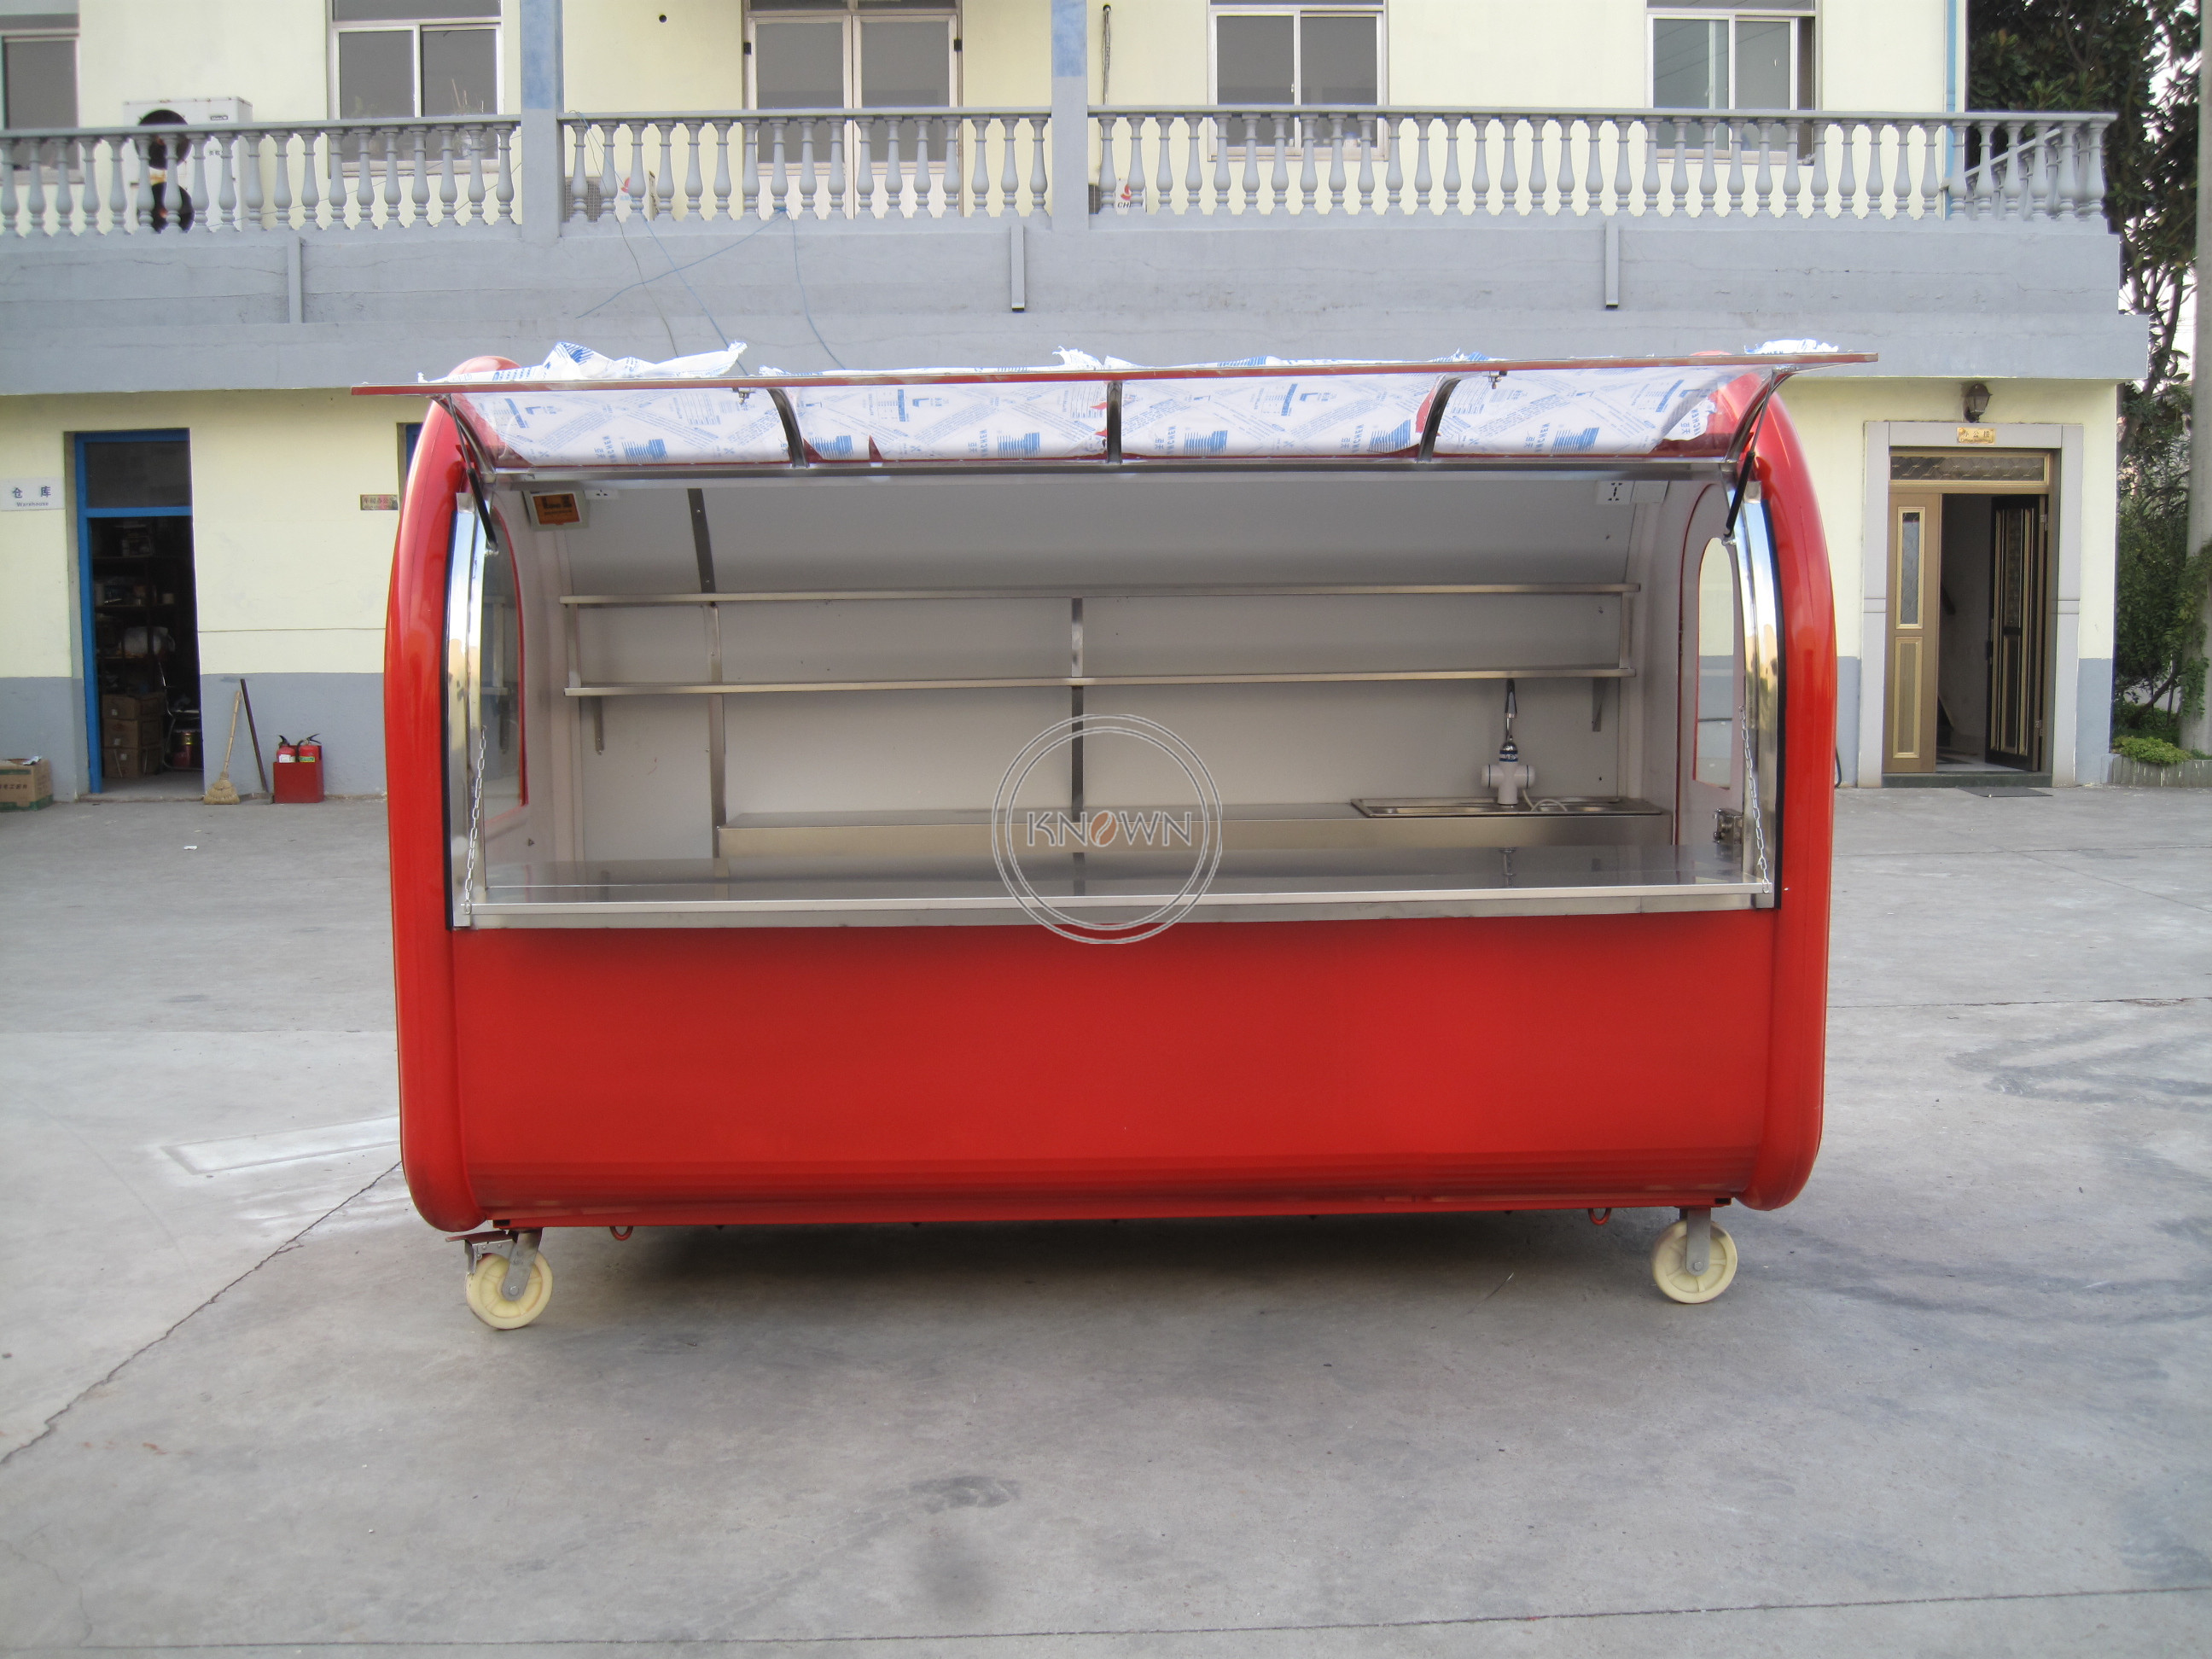 KN-300D 3M Coffee Vending Panini Chinese Food Van Vintage Mobile Concessions Trailers